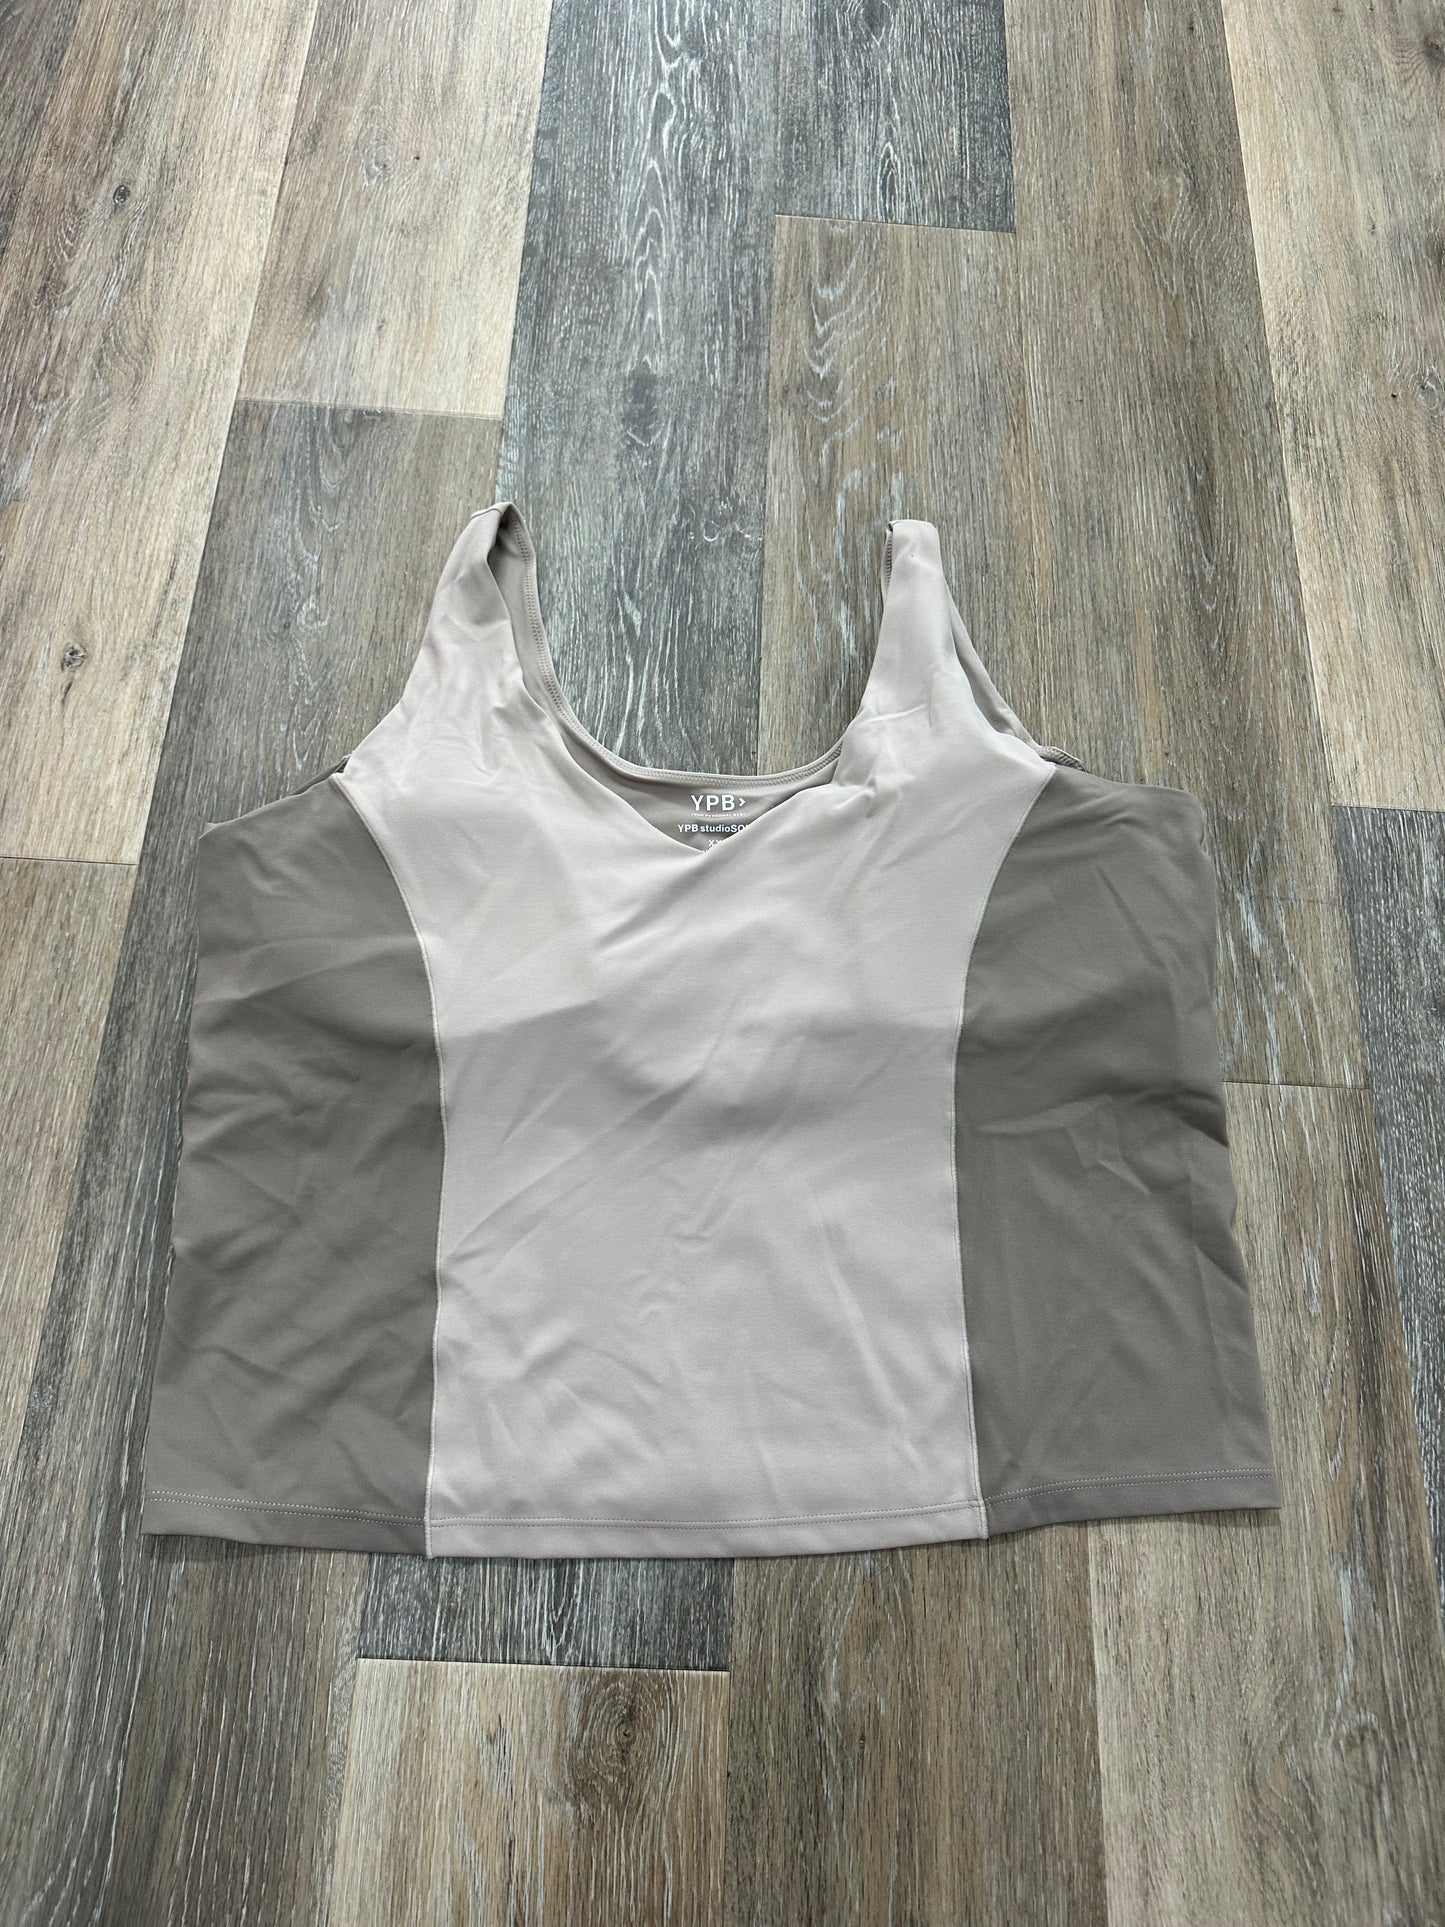 Athletic Tank Top By Abercrombie And Fitch  Size: Xxl